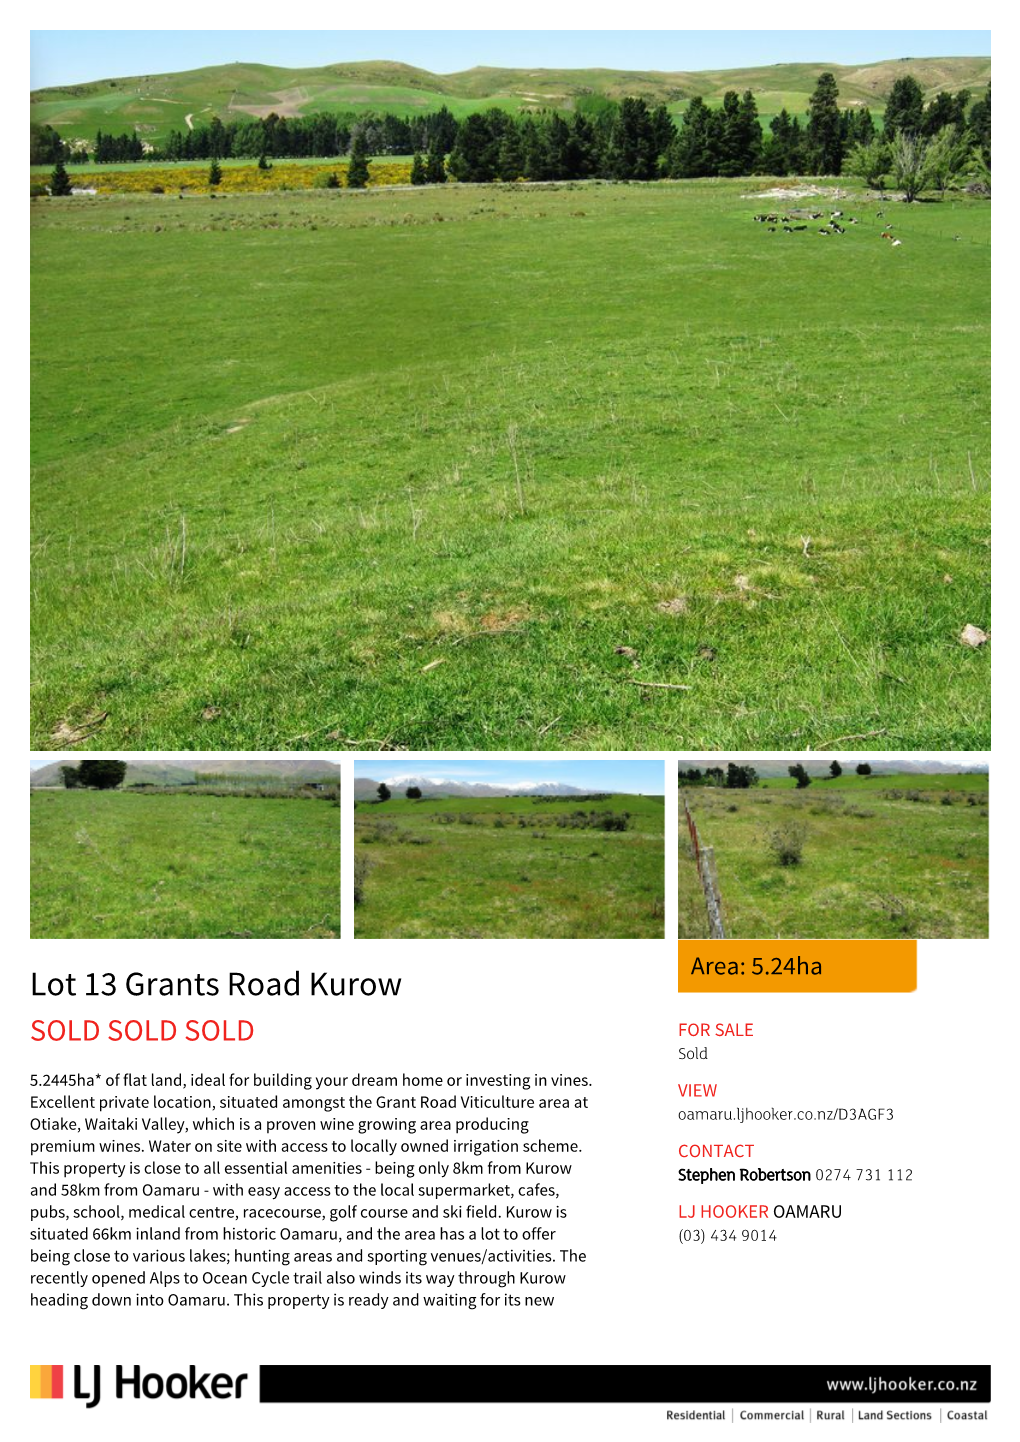 Lot 13 Grants Road Kurow SOLD SOLD SOLD for SALE Sold 5.2445Ha* of Flat Land, Ideal for Building Your Dream Home Or Investing in Vines